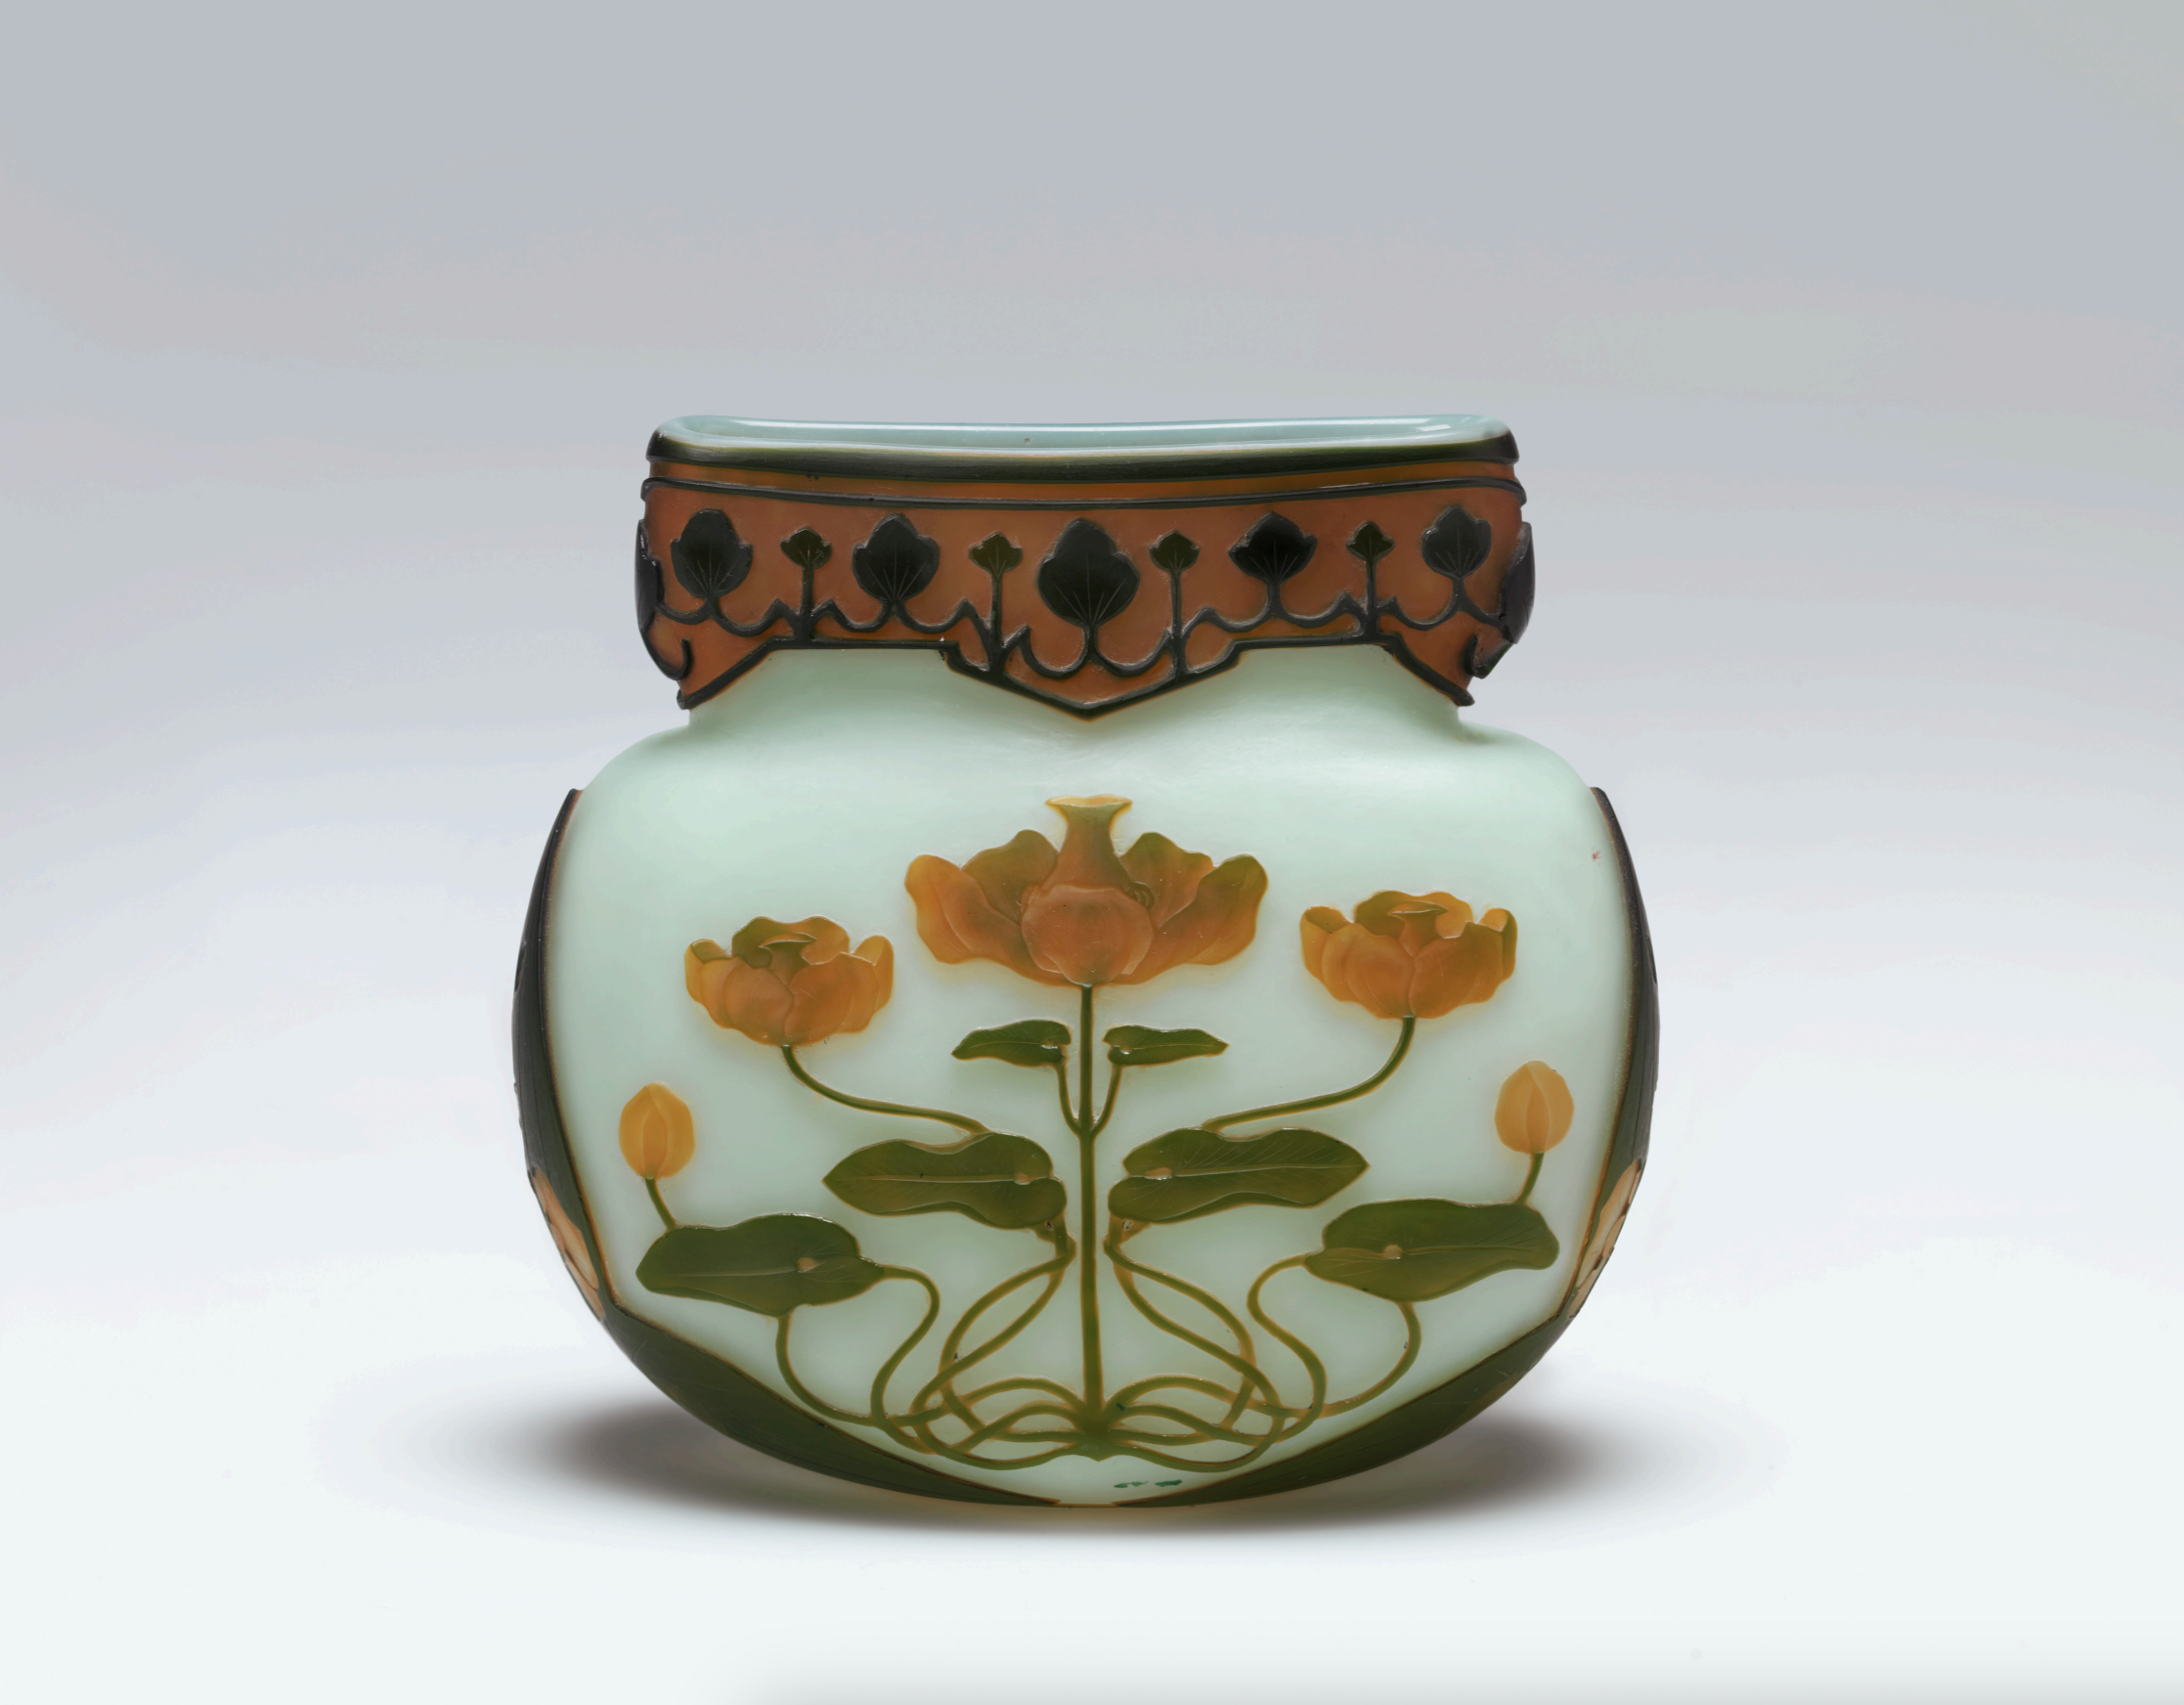 Sèvres Porcelain Manufactory, Waterlily Vase, 1900, blown and cameo glass, 6-1/4 × 7-3/8 × 3-7/8 inches. Gift of Walter P. Chrysler, Jr., image courtesy of the Chrysler Museum of Art. Photograph by Edward Pollard © Sèvres Porcelain Manufactory